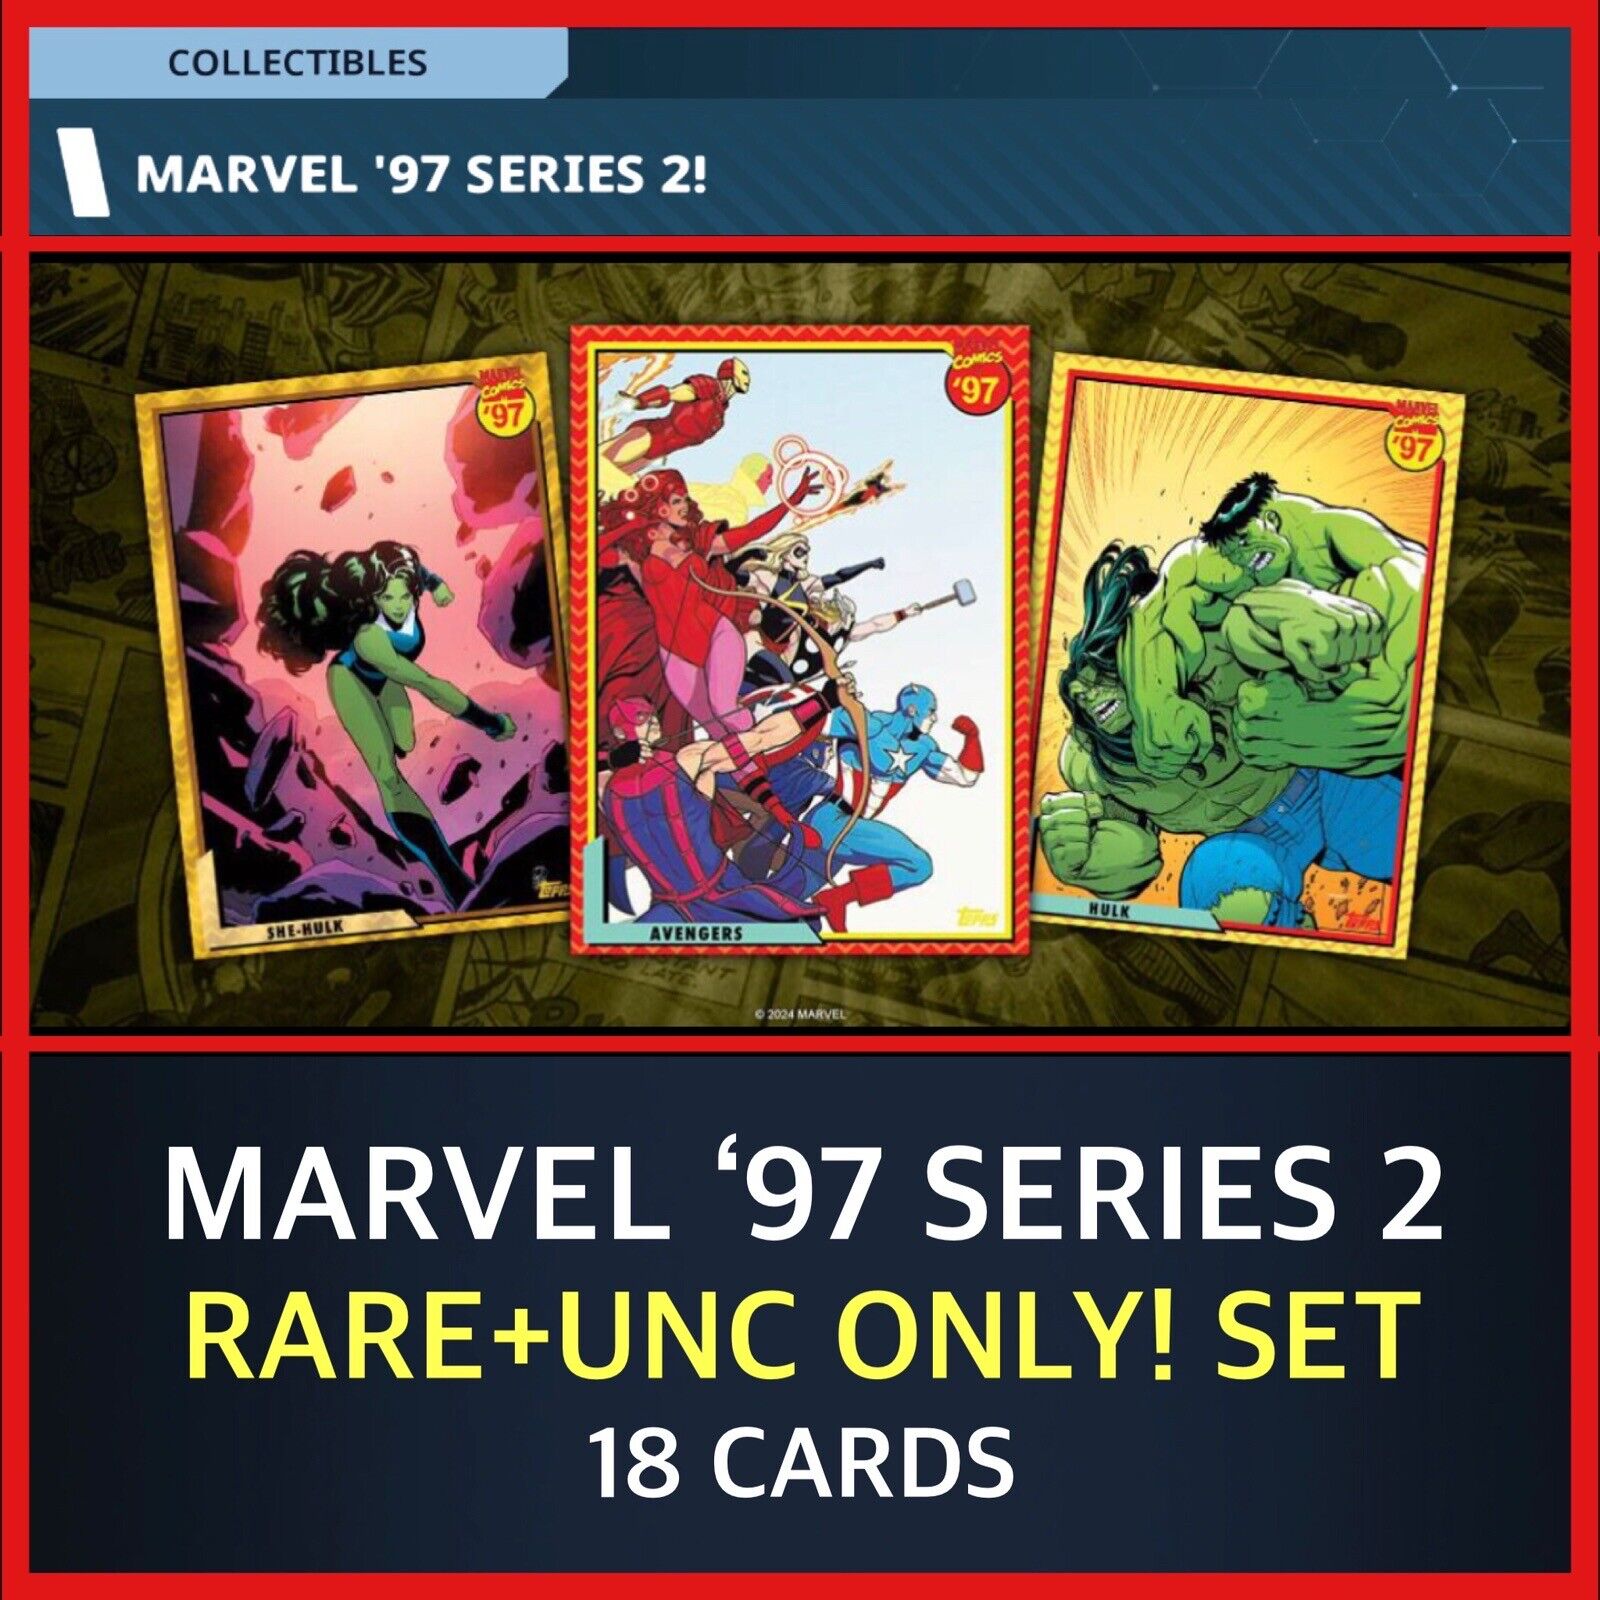 MARVEL ‘97 SERIES 2-RARE+UNCM ONLY 18 CARD SET-TOPPS MARVEL COLLECT